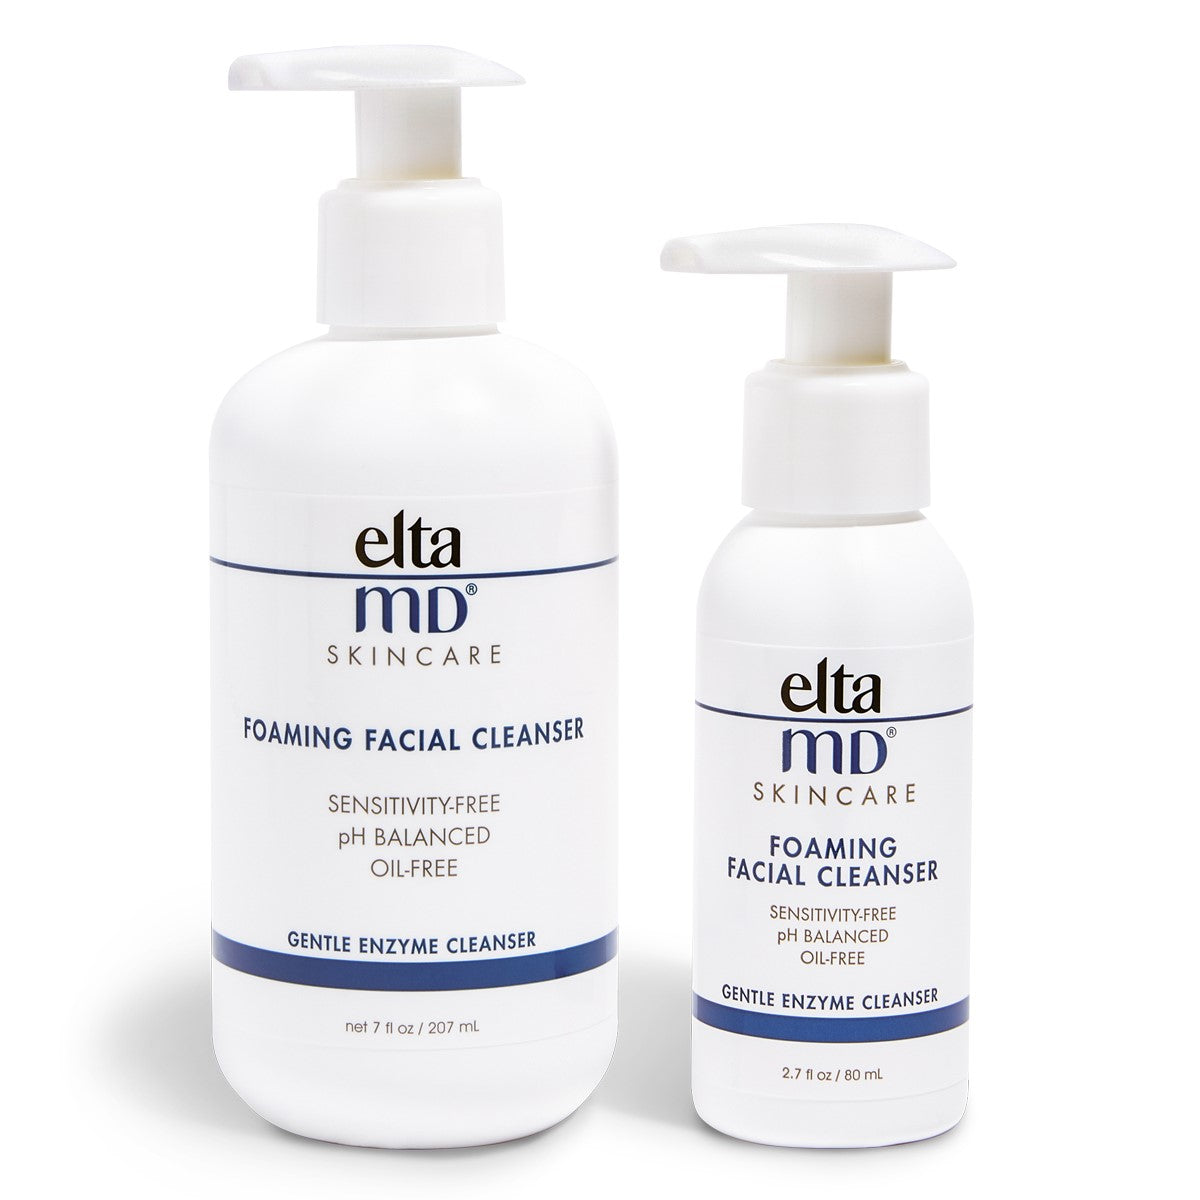 EltaMD Foaming Facial Cleanser is available in both Home and Travel Sizes on MyExceptionalSkinCare.com